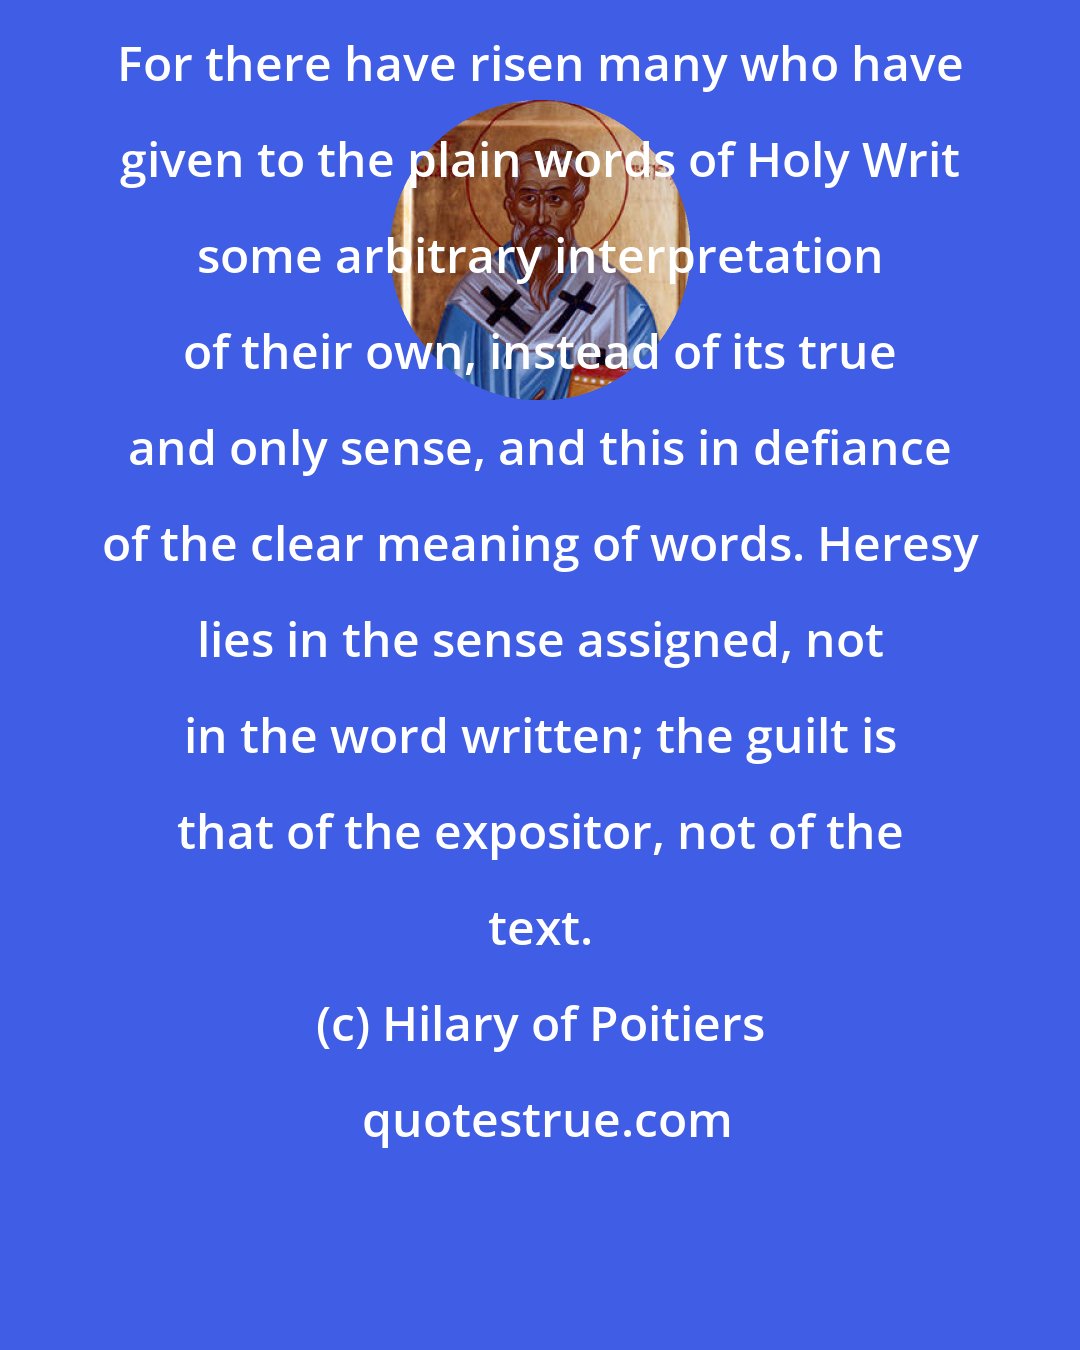 Hilary of Poitiers: For there have risen many who have given to the plain words of Holy Writ some arbitrary interpretation of their own, instead of its true and only sense, and this in defiance of the clear meaning of words. Heresy lies in the sense assigned, not in the word written; the guilt is that of the expositor, not of the text.